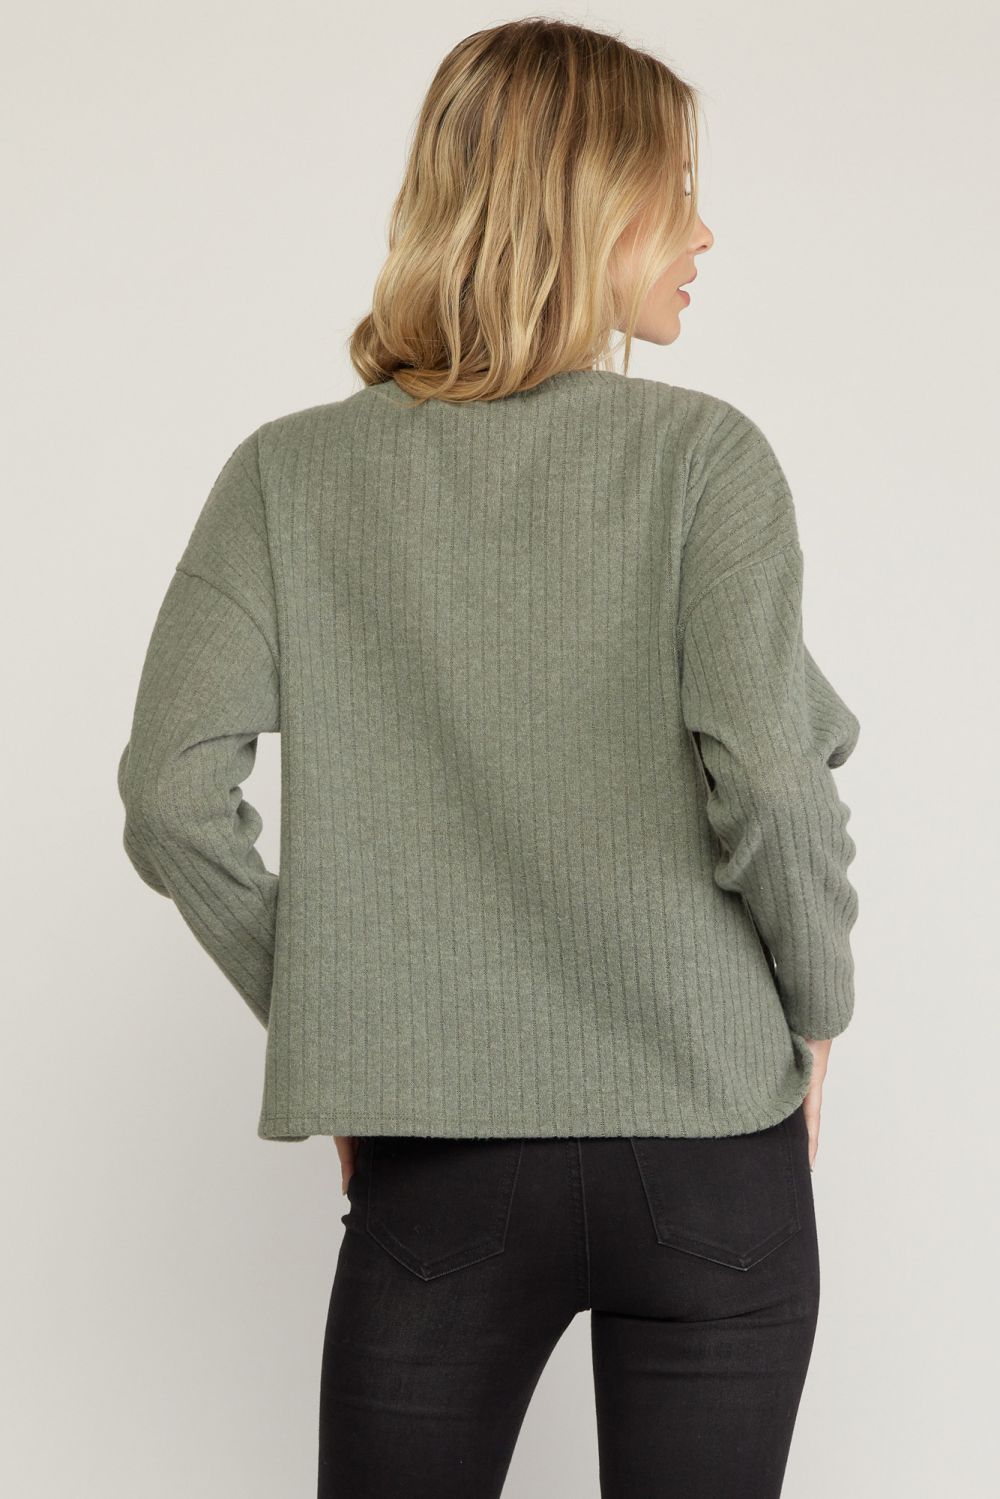 Main Thing Round Neck Long Sleeve Top Olive